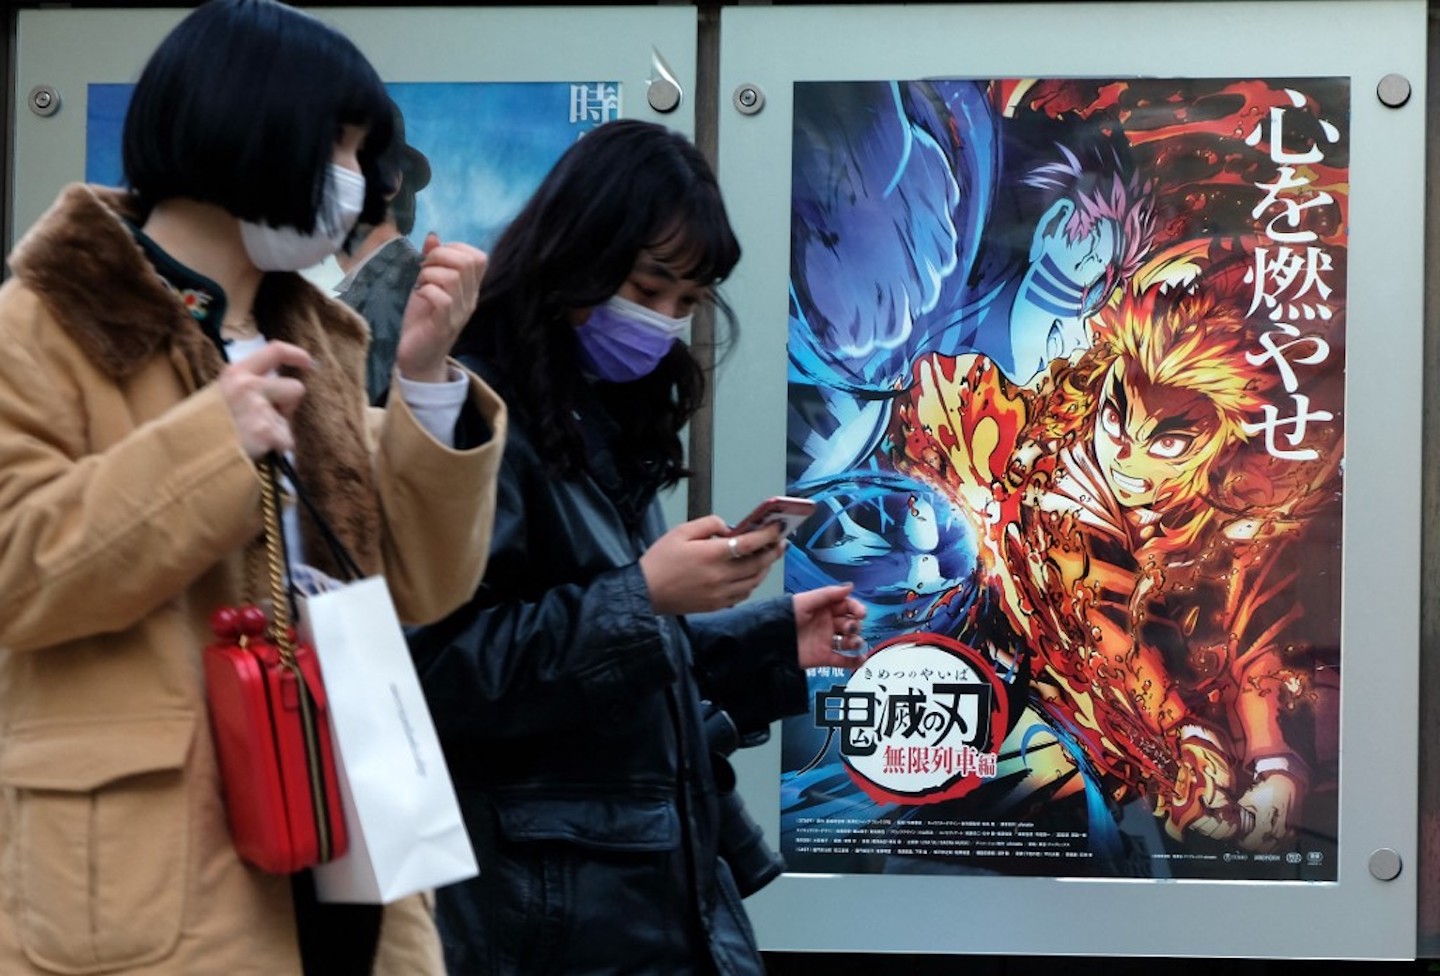 Kids Are Watching 'Demon Slayer' in Japan. In the US, It's Rated R.